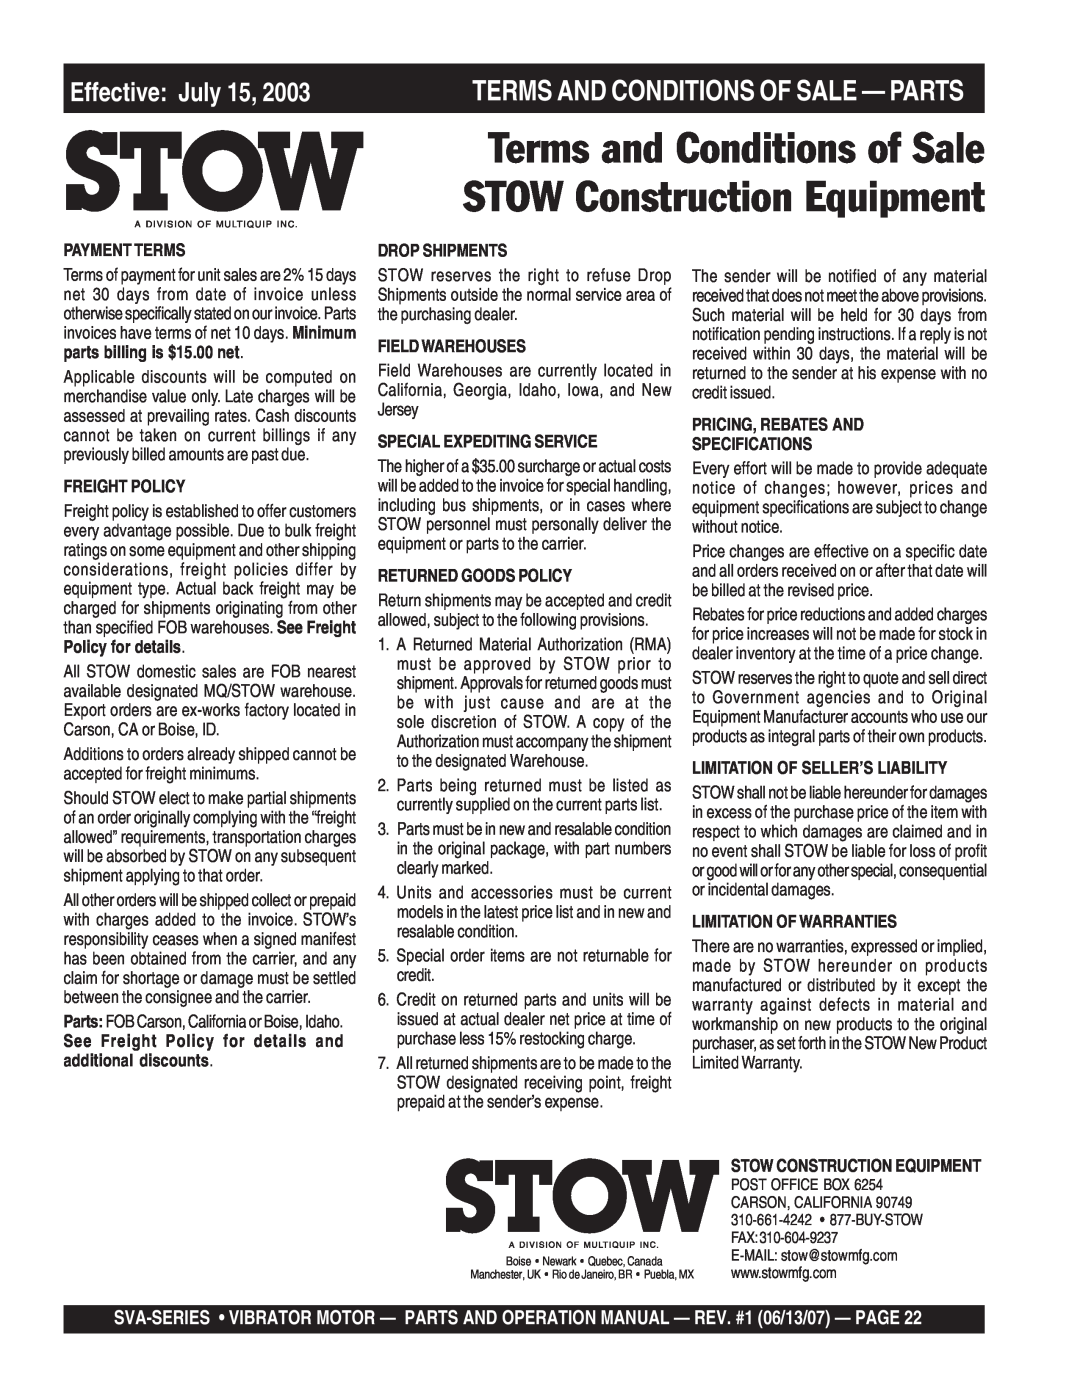 Stow SVA-3 Effective July, Terms and Conditions of Sale STOW Construction Equipment, Terms And Conditions Of Sale - Parts 